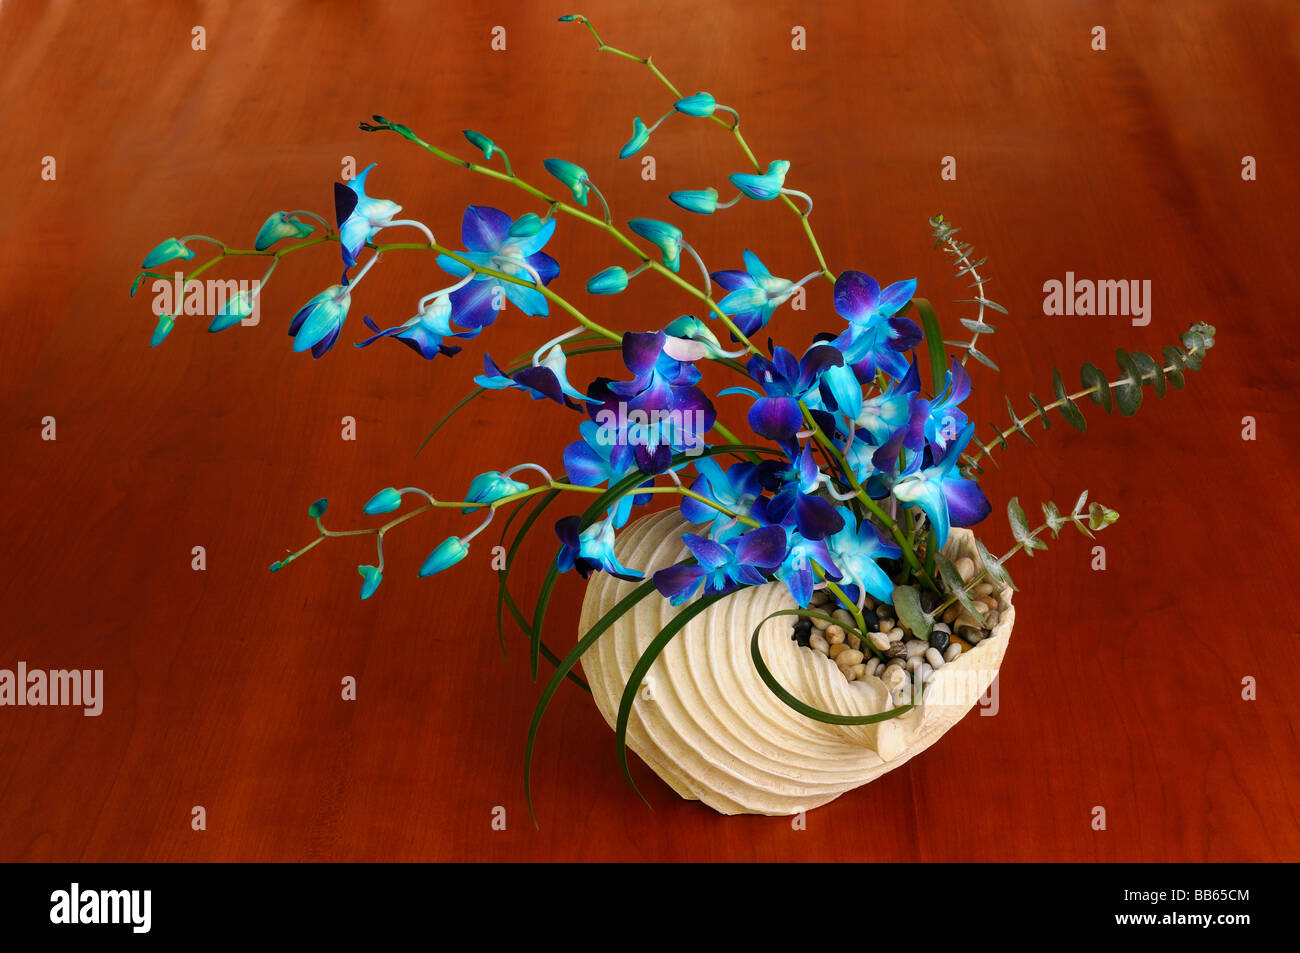 Homemade gift of Dendrovian Orchid dyed blue in a seashell flower arrangement on a wood table Stock Photo